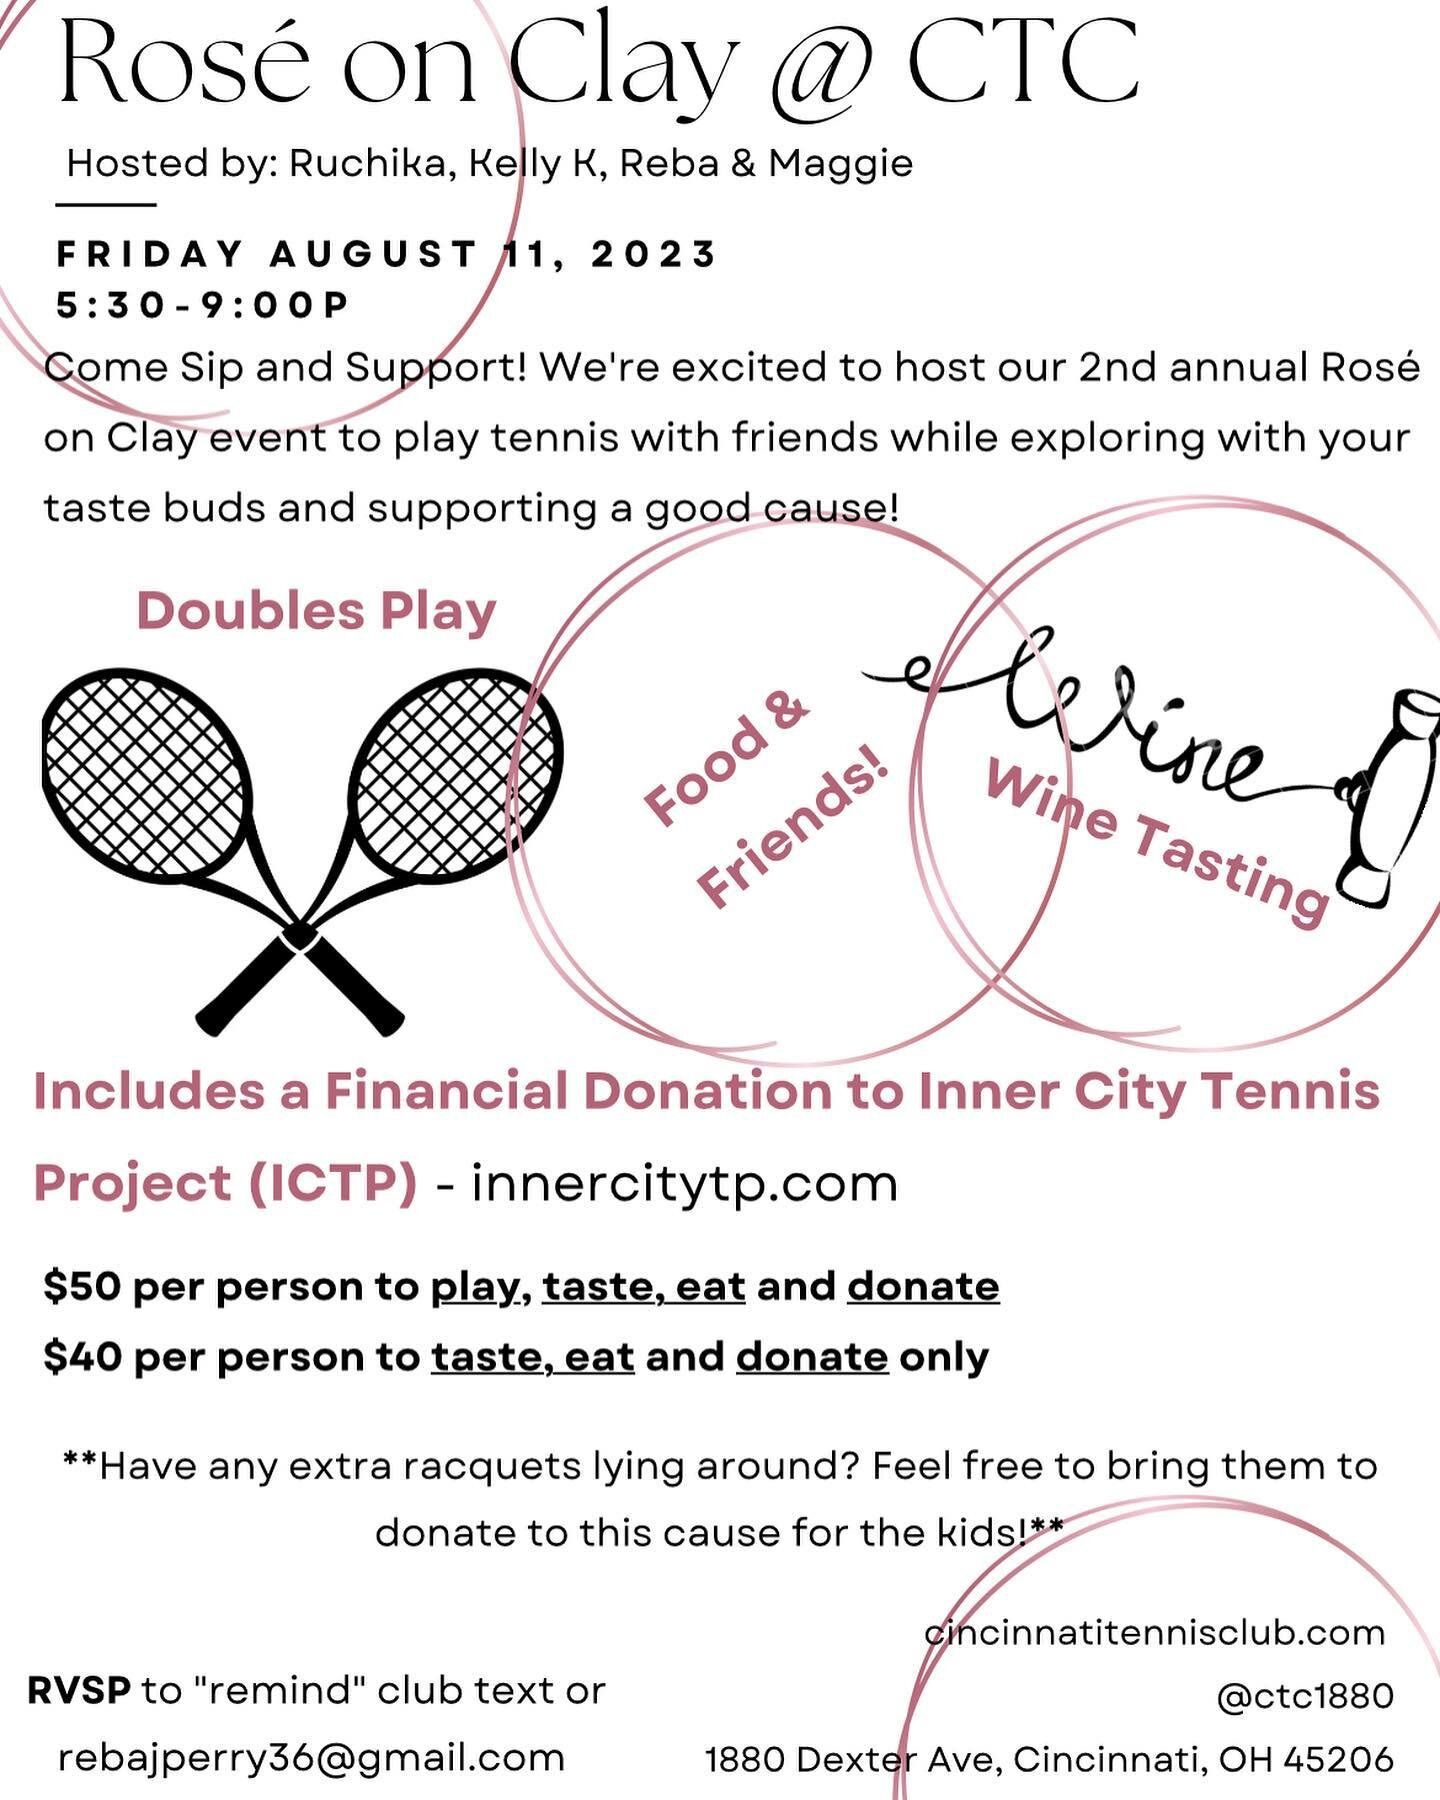 Next event alert🚨! Come join us on August 11 for doubles play, wine tasting 🥂and support of a fantastic local tennis program @ictp.tennis.project 🎾